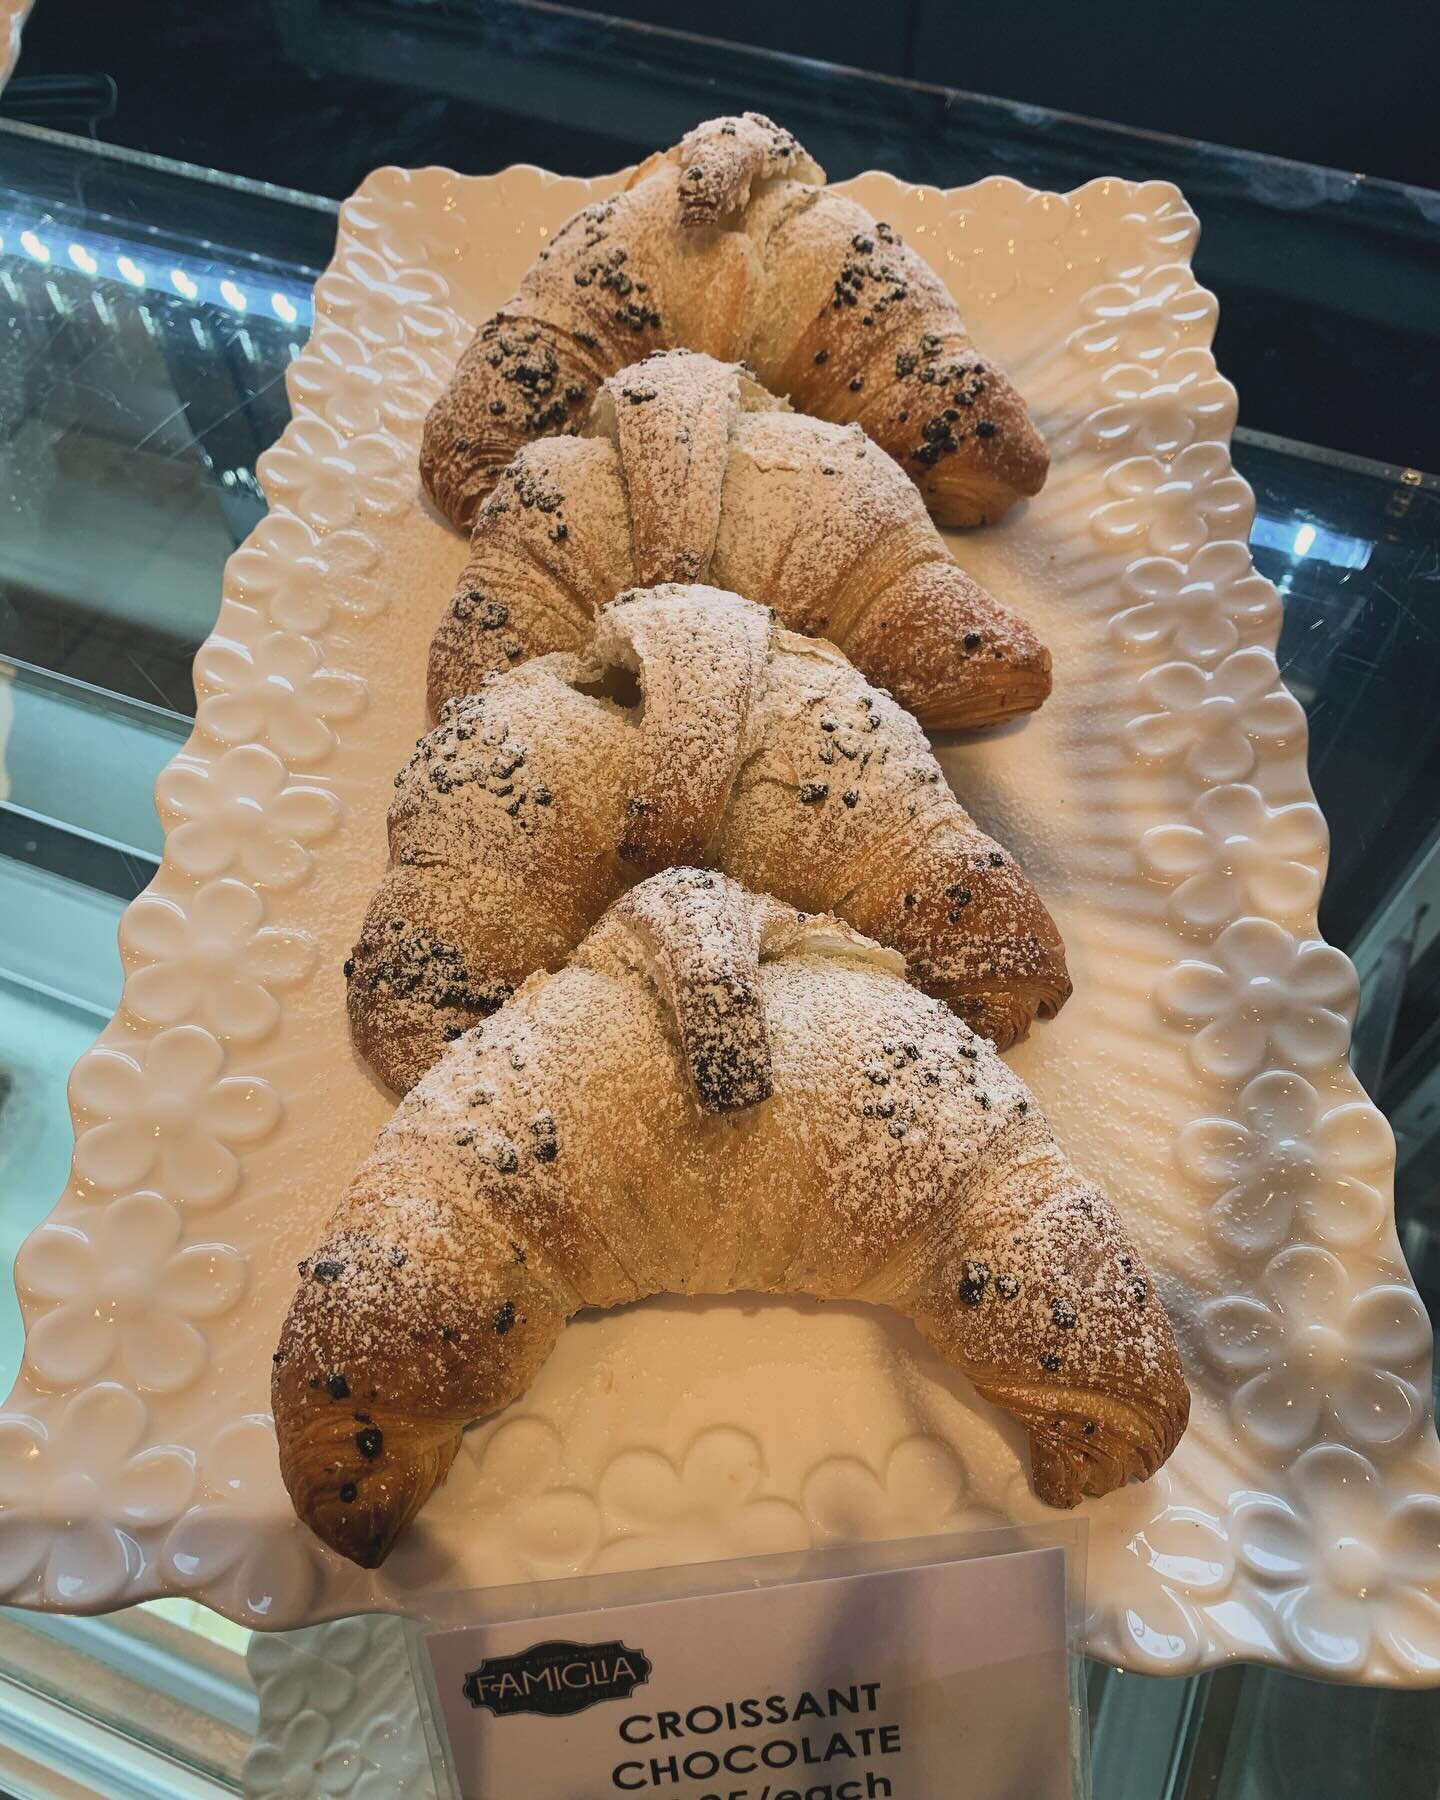 Warm chocolate croissant, doesn&rsquo;t get much better than this!  See you soon! Ciao Cafe at Famiglia Ristorante now open at 9:00am.